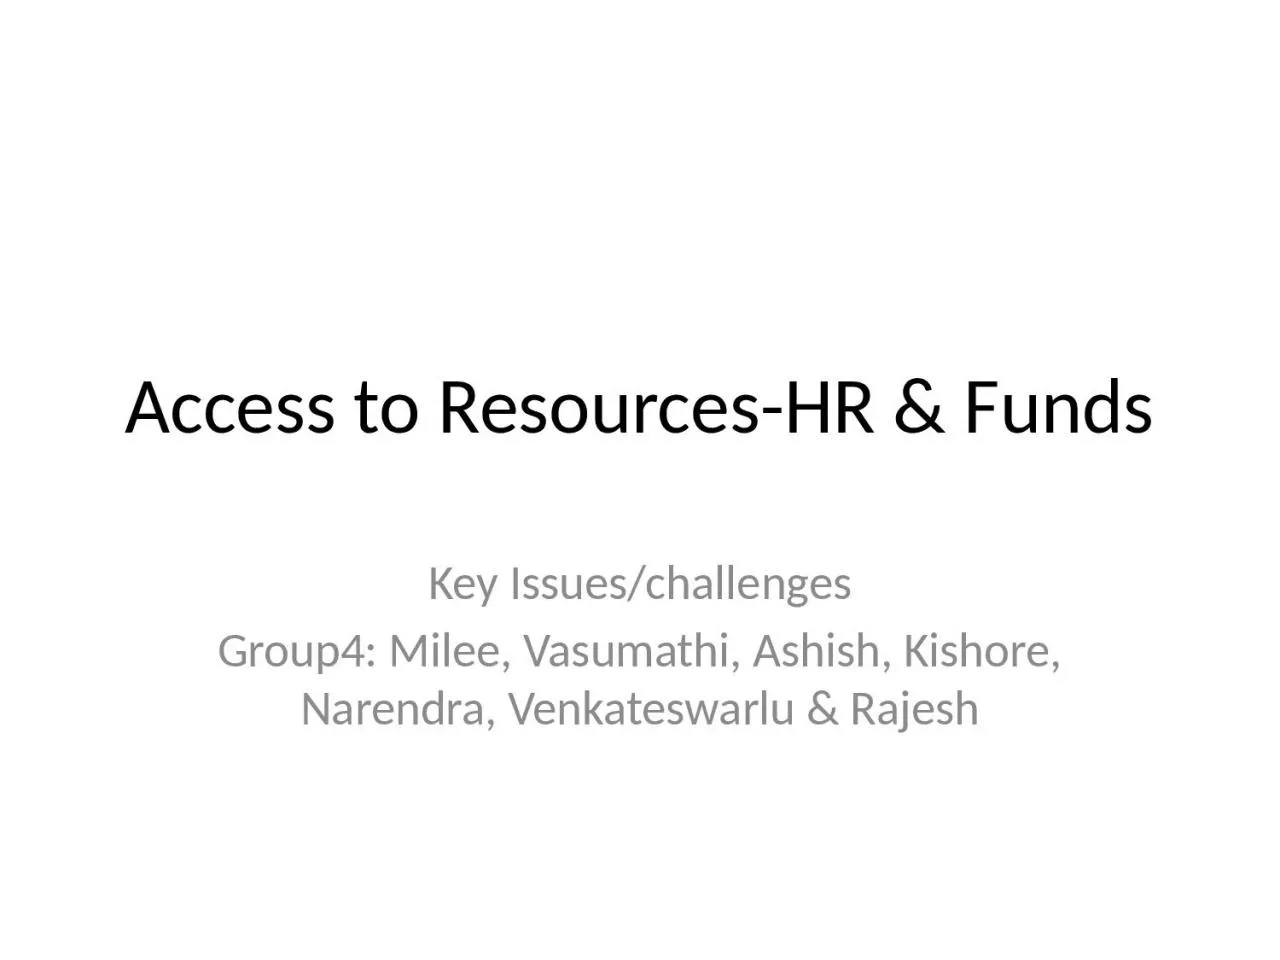 Access to Resources-HR & Funds